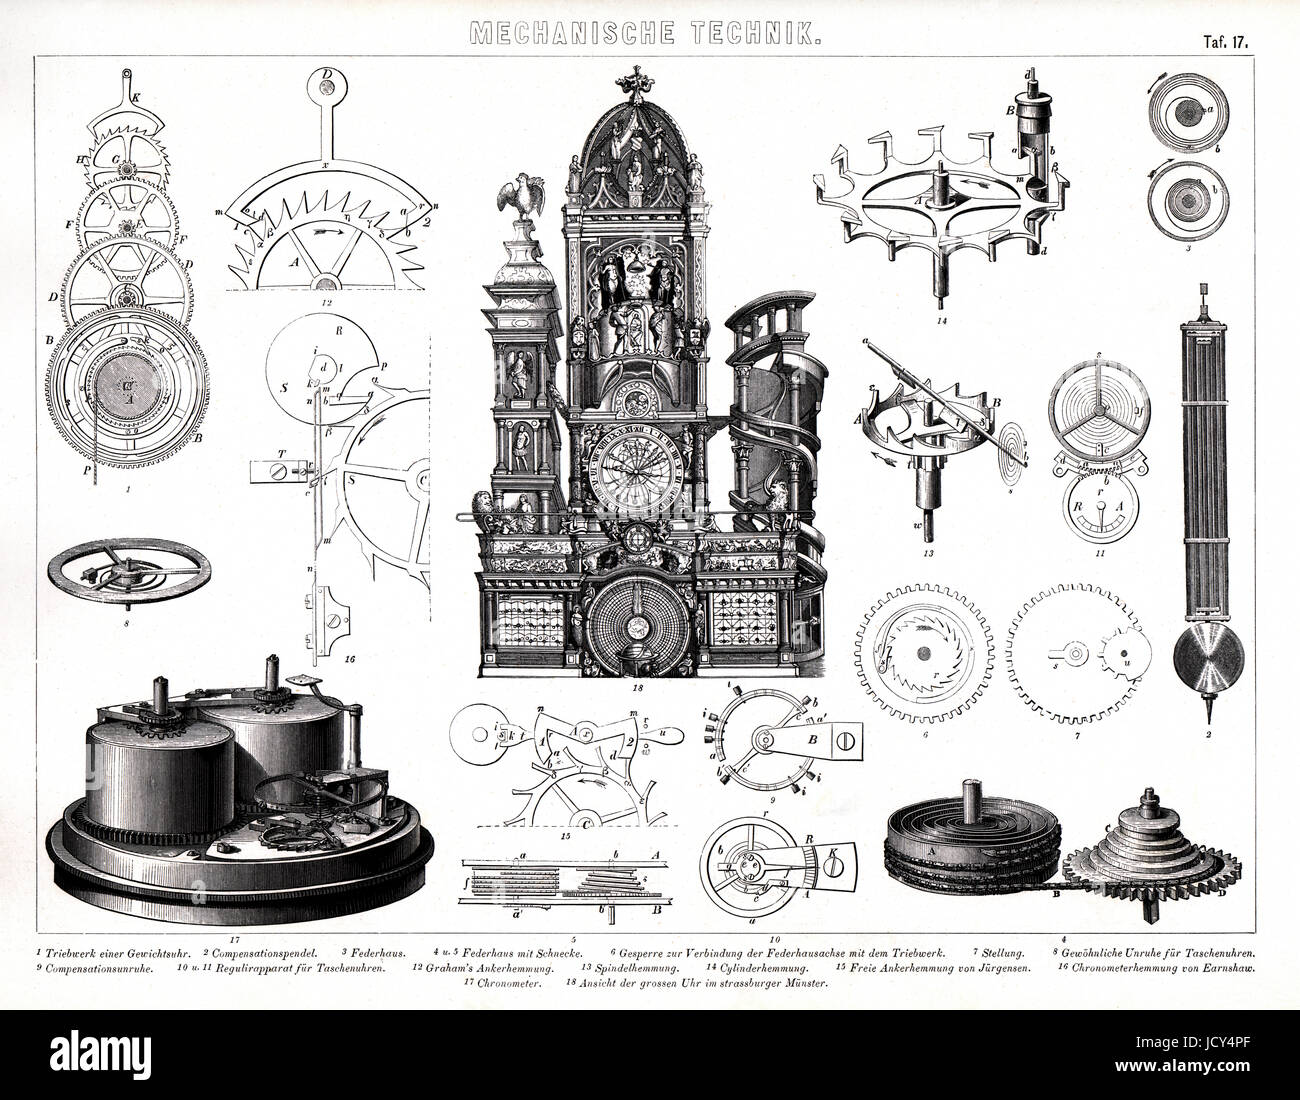 1874 Bilder Print of the Munster Cathedral Astronomical Clock in Germany with a breakdown of the mechanical parts that tell the time and mark astronomical events such as full moons and seasons. Stock Photo